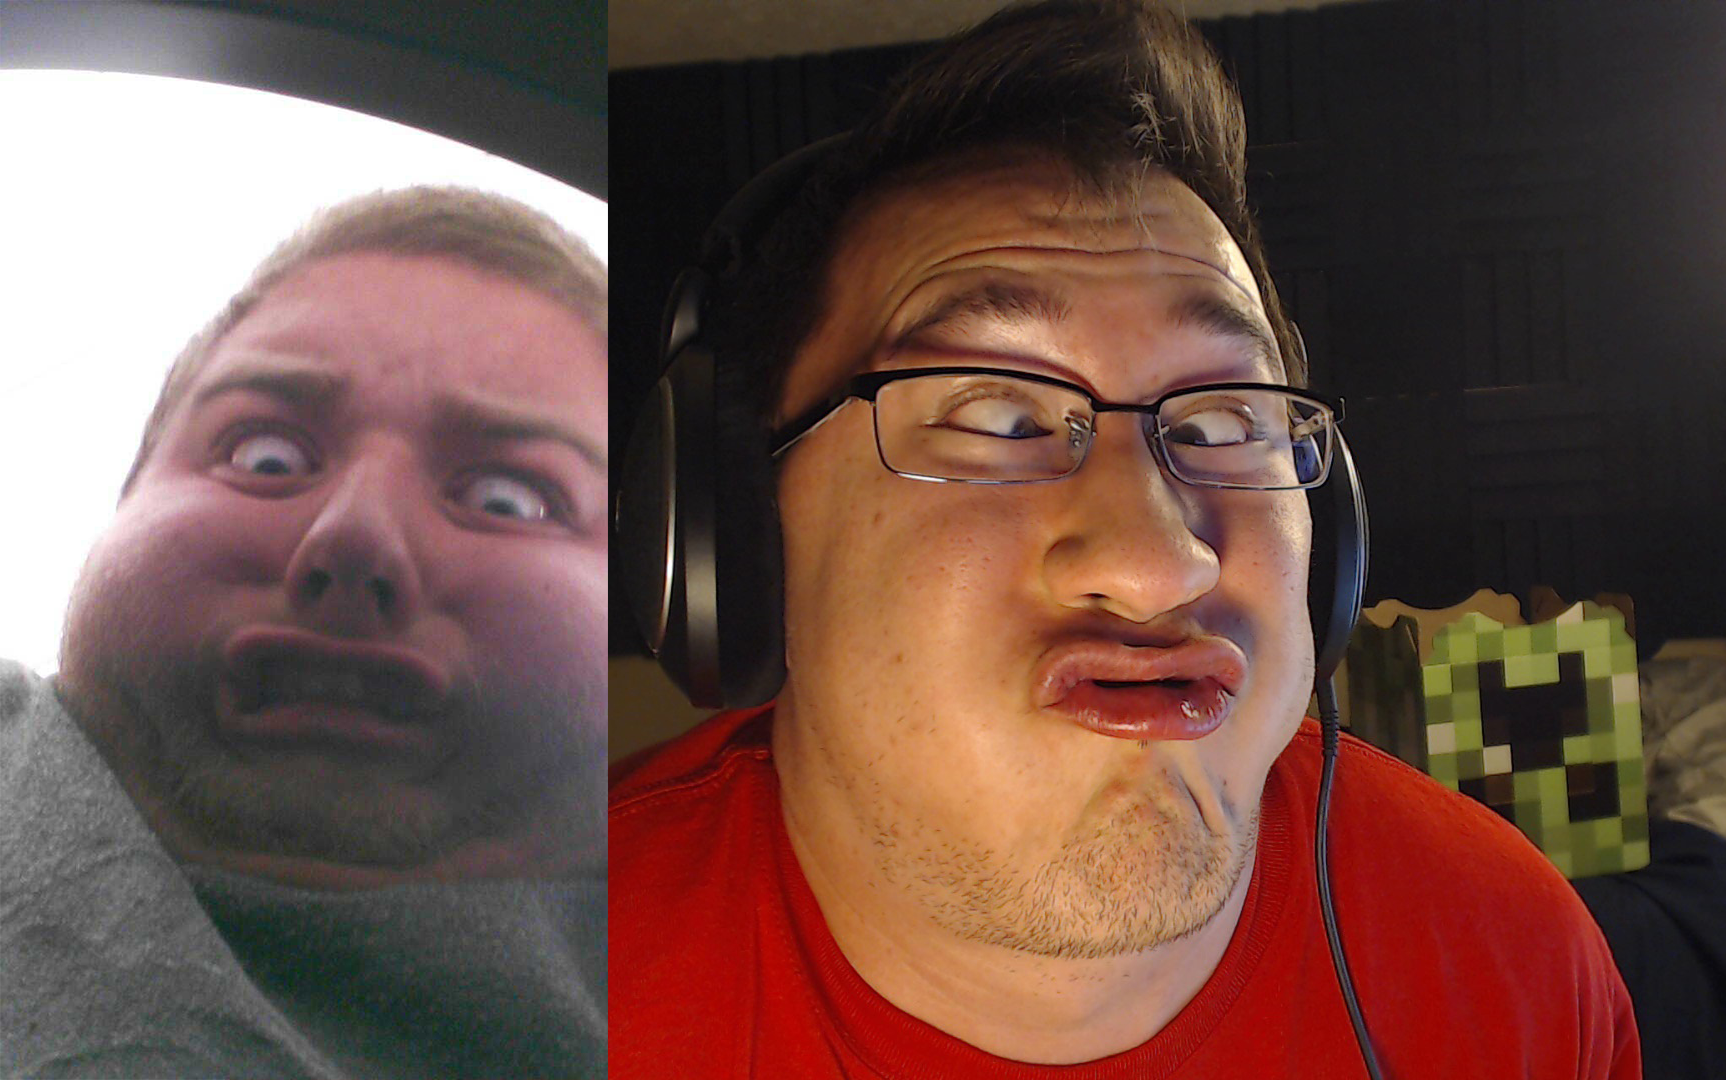 ““@markiplier: Sometimes, I try to recreate funny faces I see on the intern...